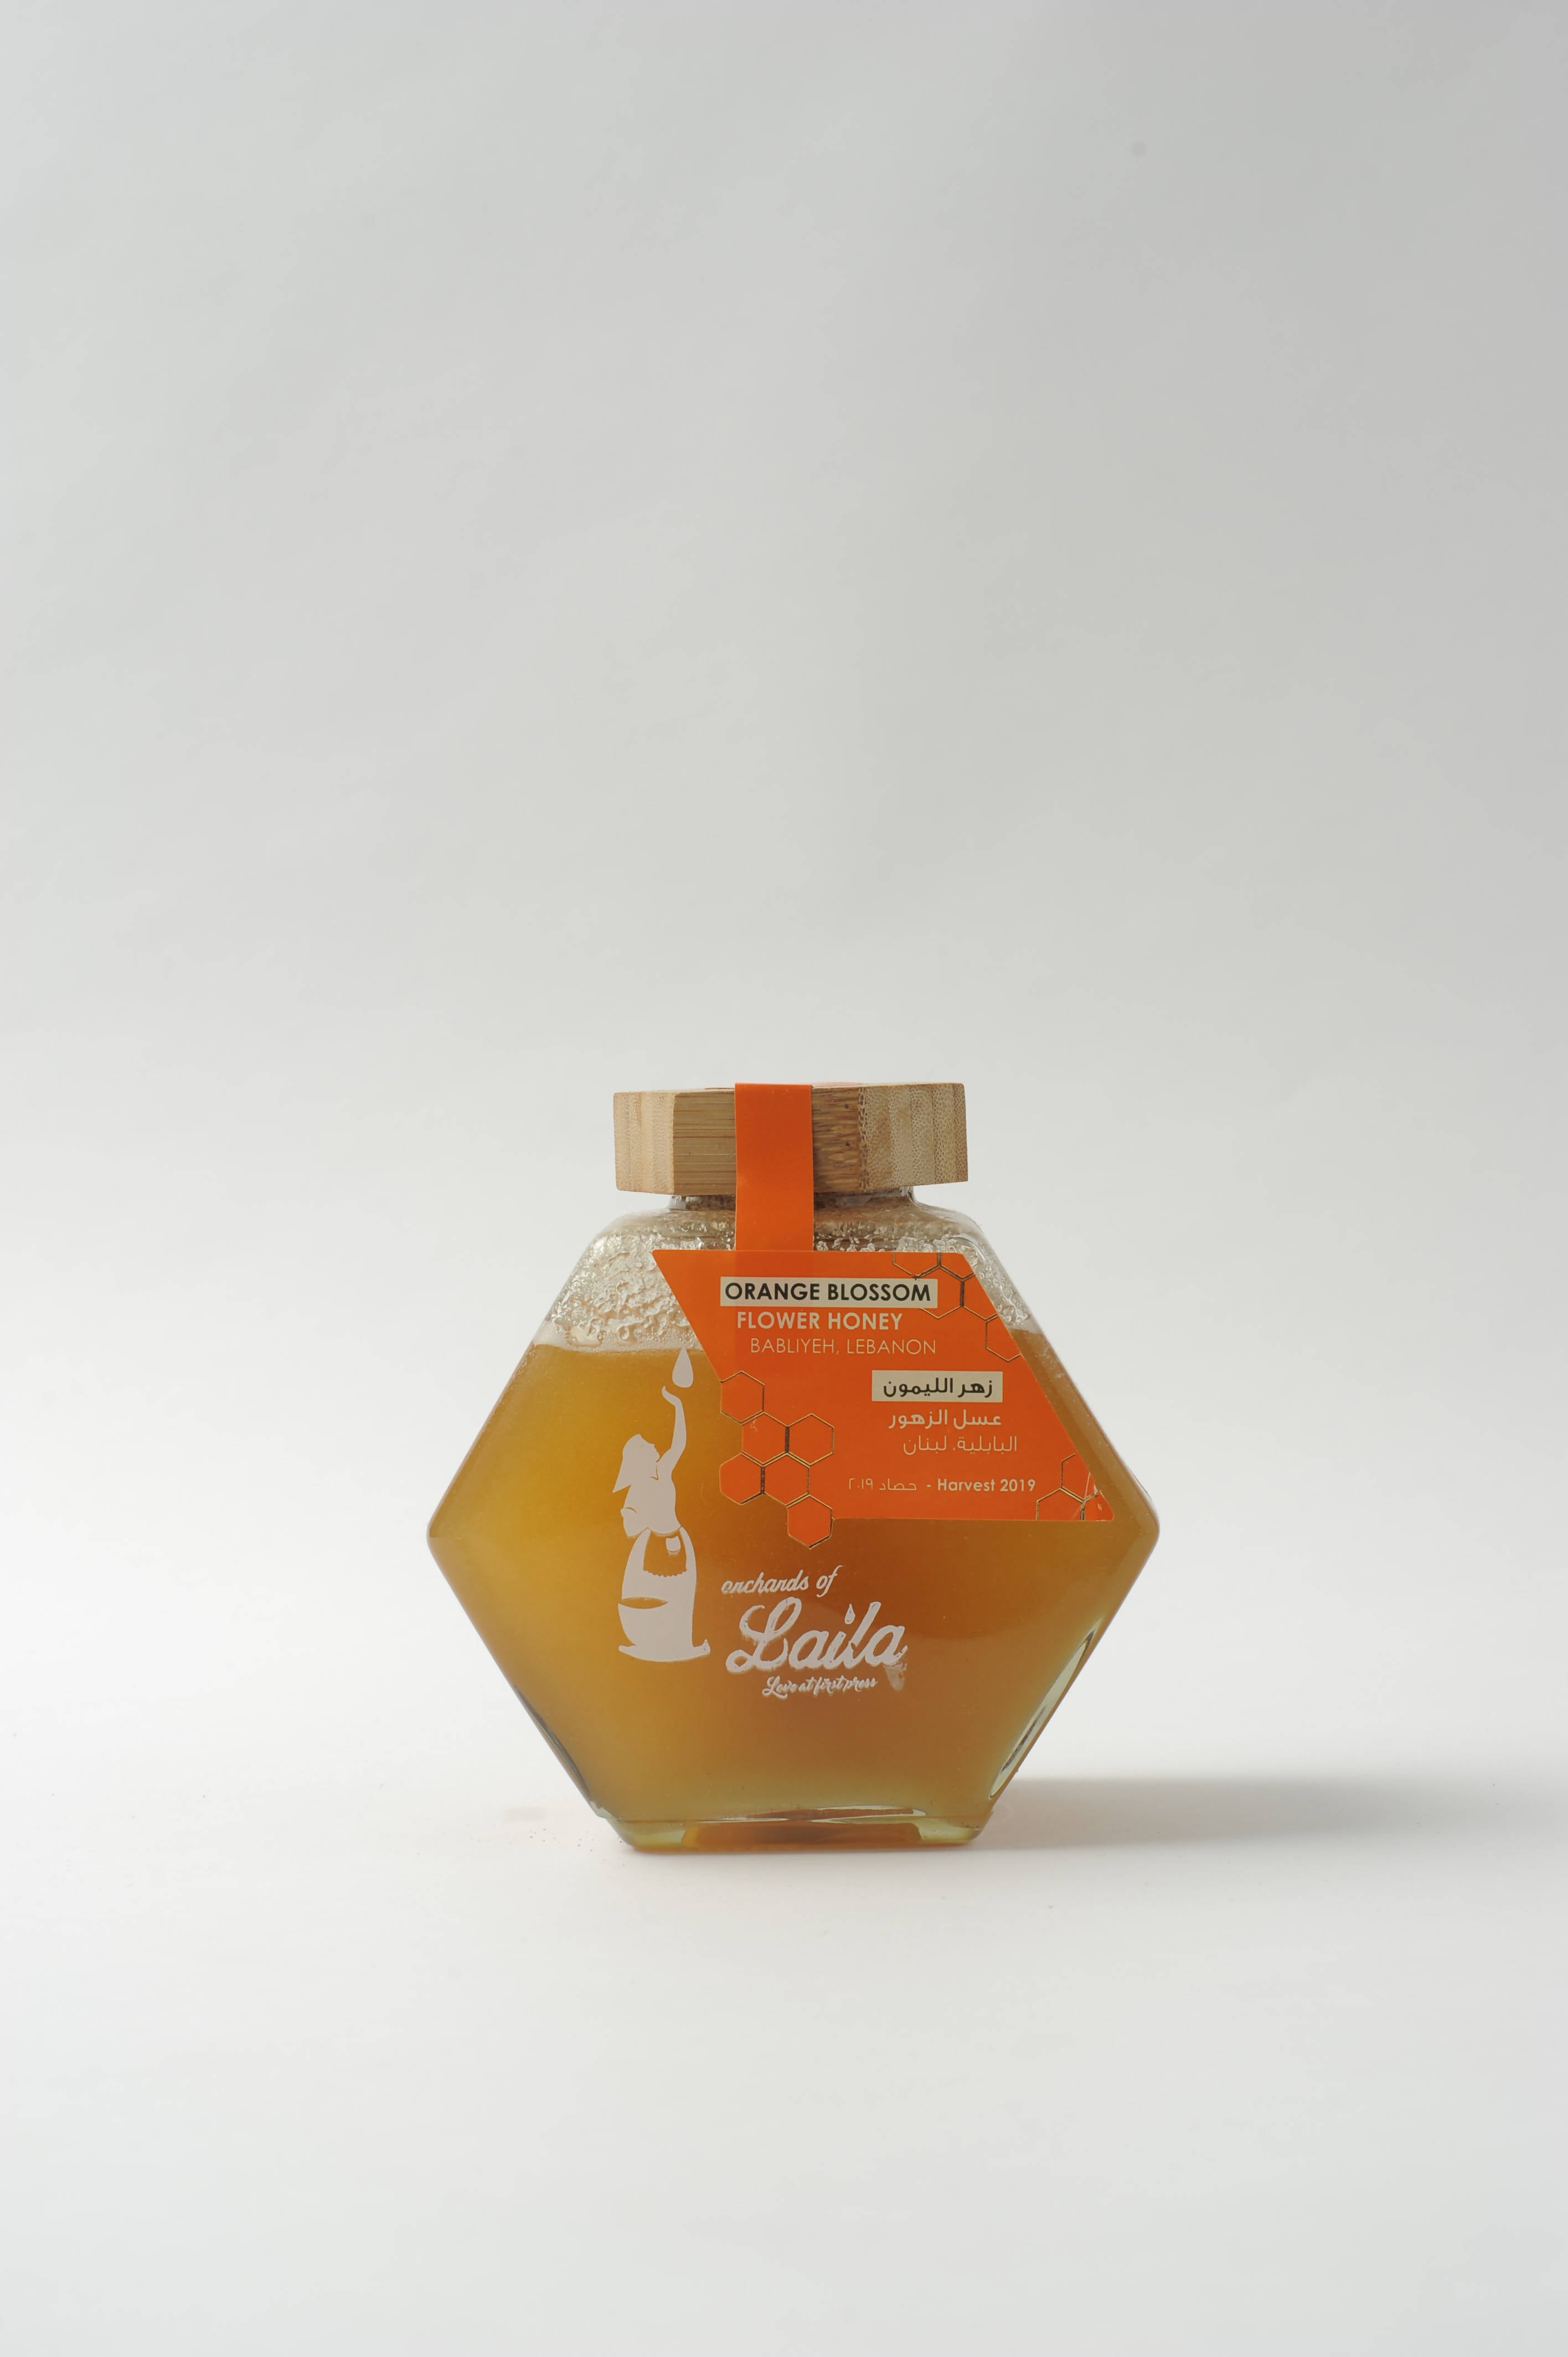 Orchards of Laila's 500g Jar of Luxury Pure Floral Honey - Orange Blossom